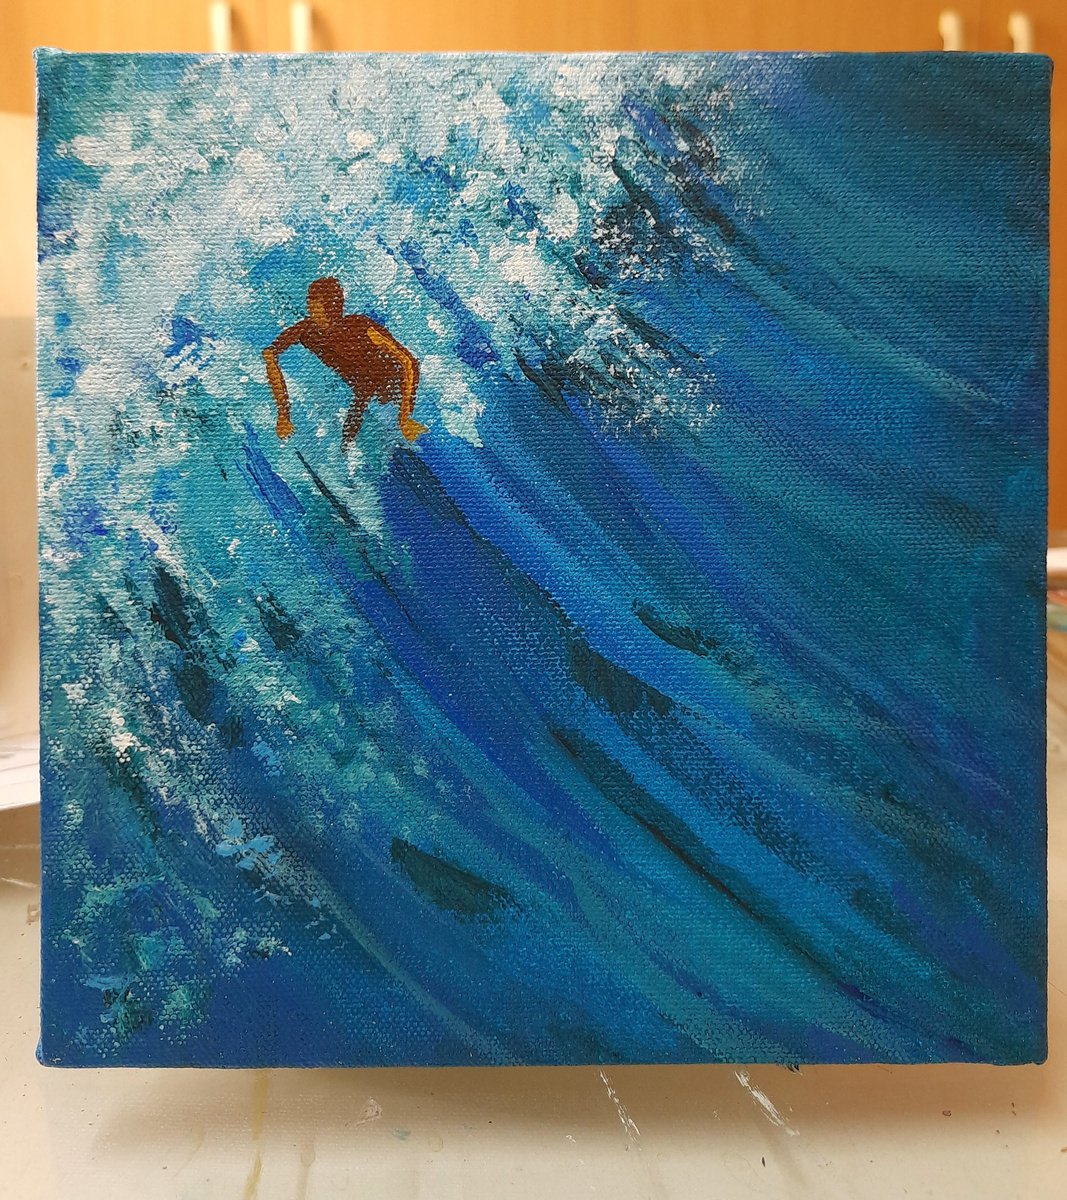 Surfer in the blue sea 4 Acrylic painting by Asha Shenoy | Artfinder